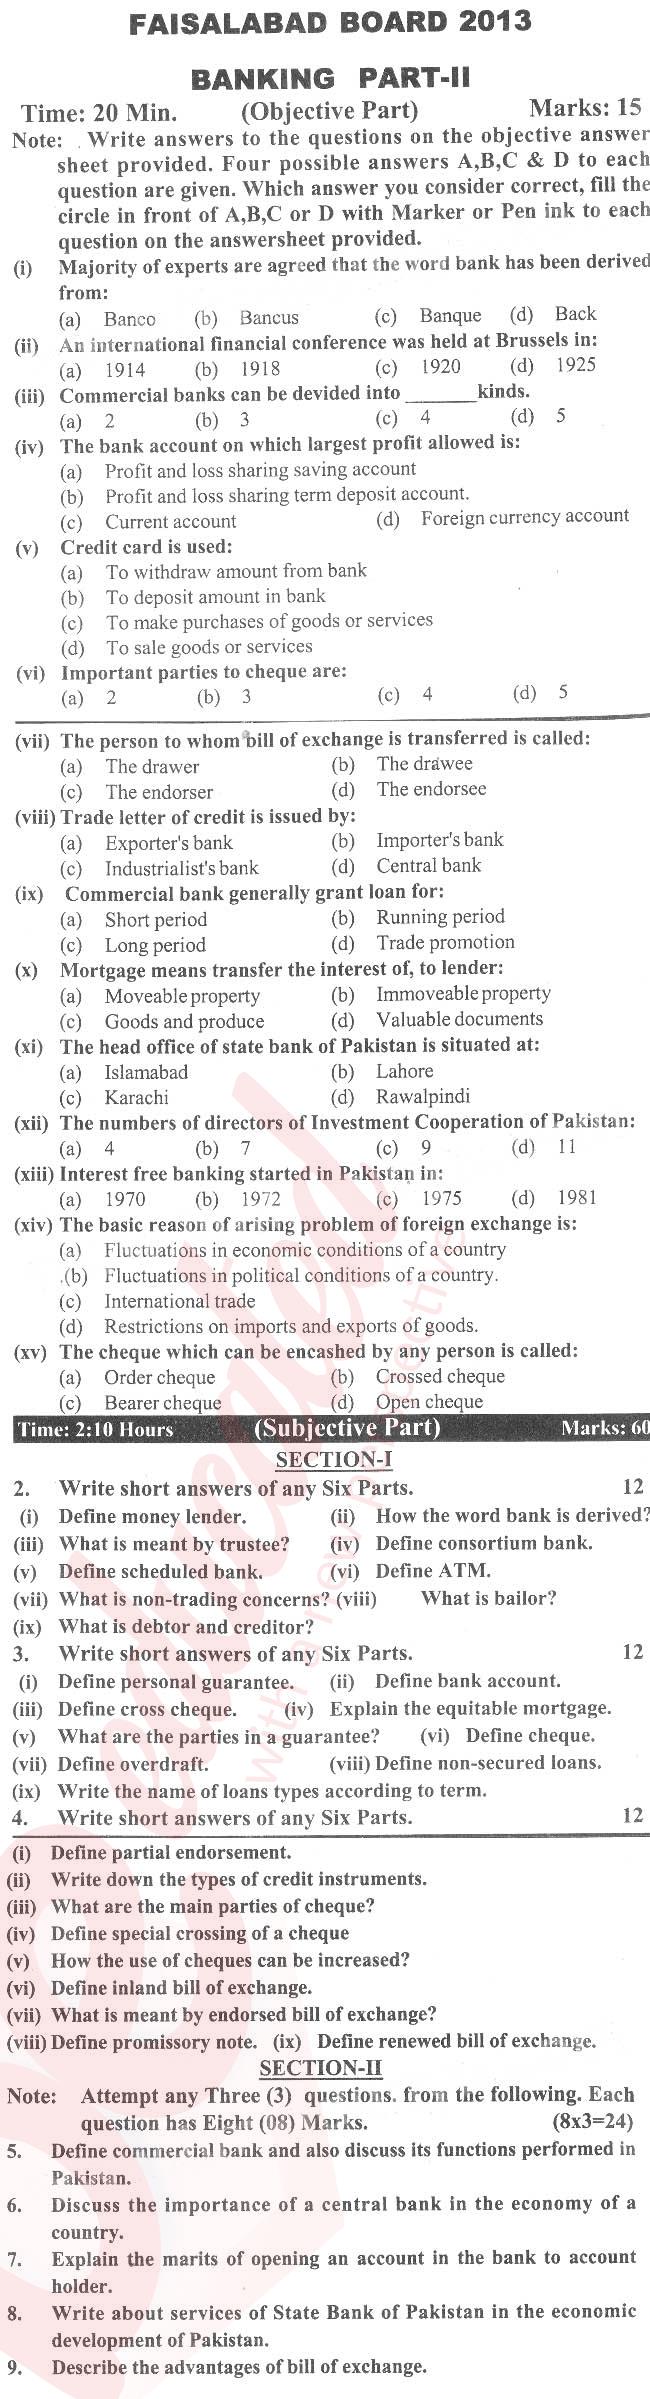 Principles of Banking ICOM Part 2 Past Paper Group 1 BISE Faisalabad 2013